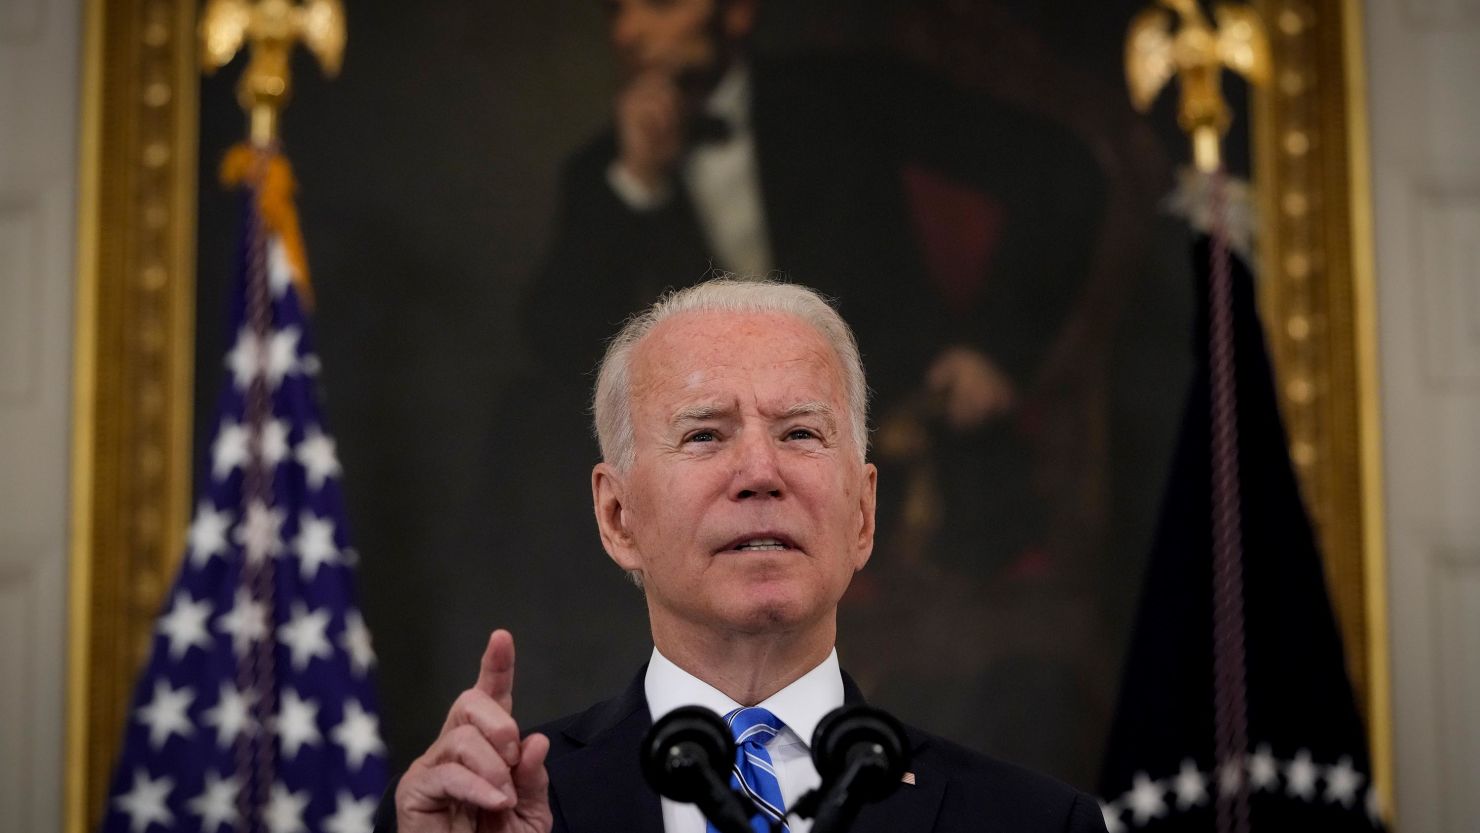 President Joe Biden speaks about the nation's economic recovery amid the Covid-19 pandemic in the State Dining Room of the White House on July 19, 2021.